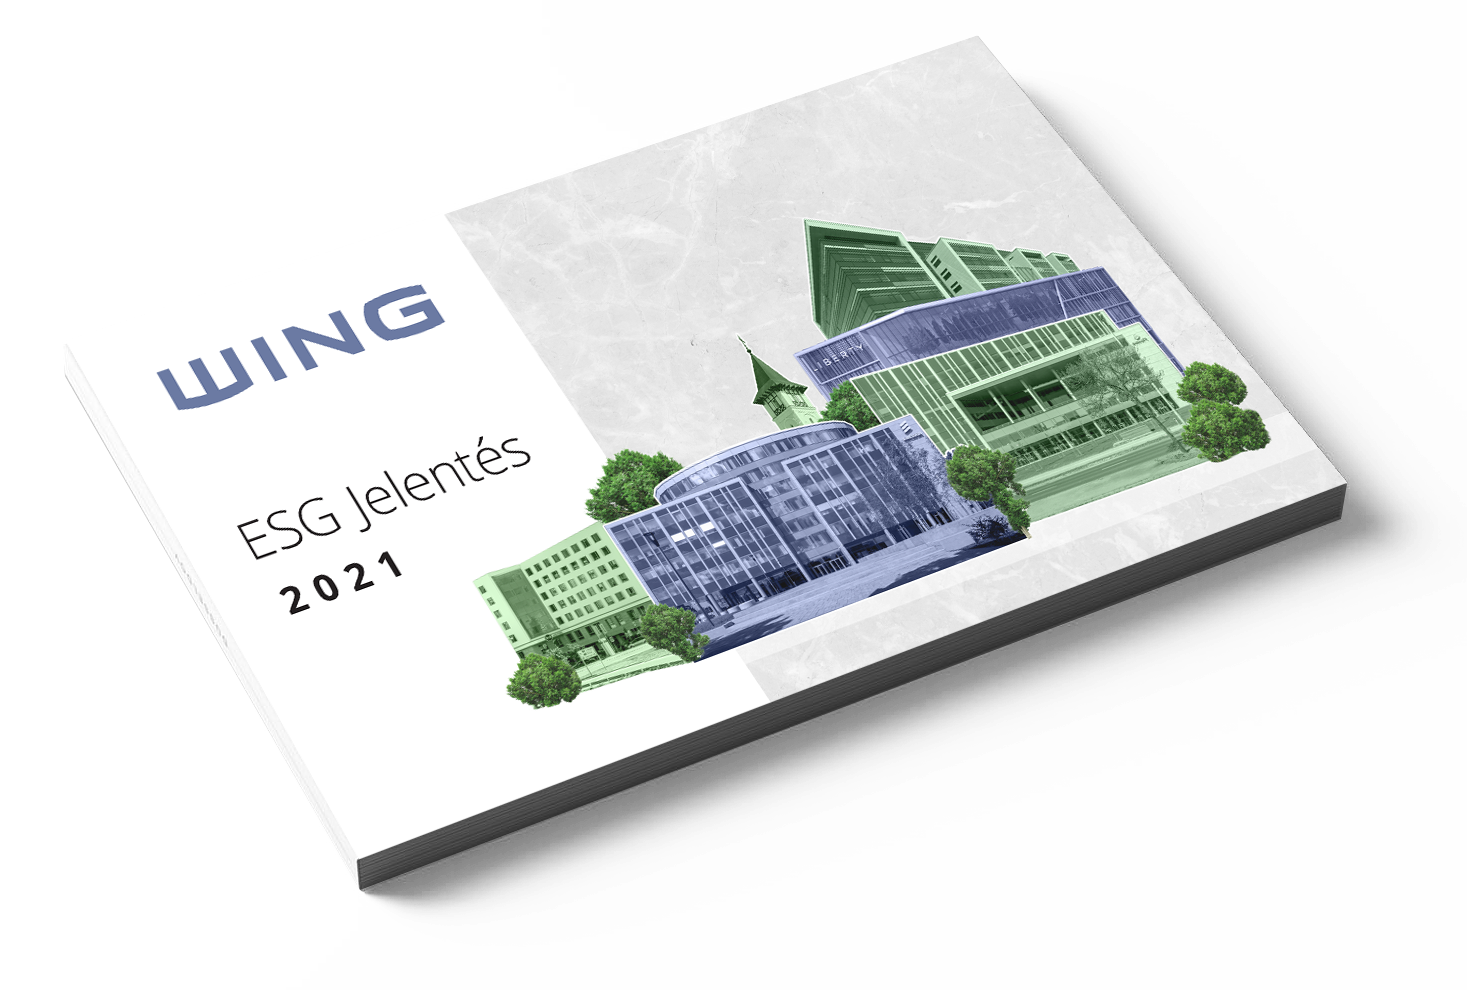 WING has published its first ESG report